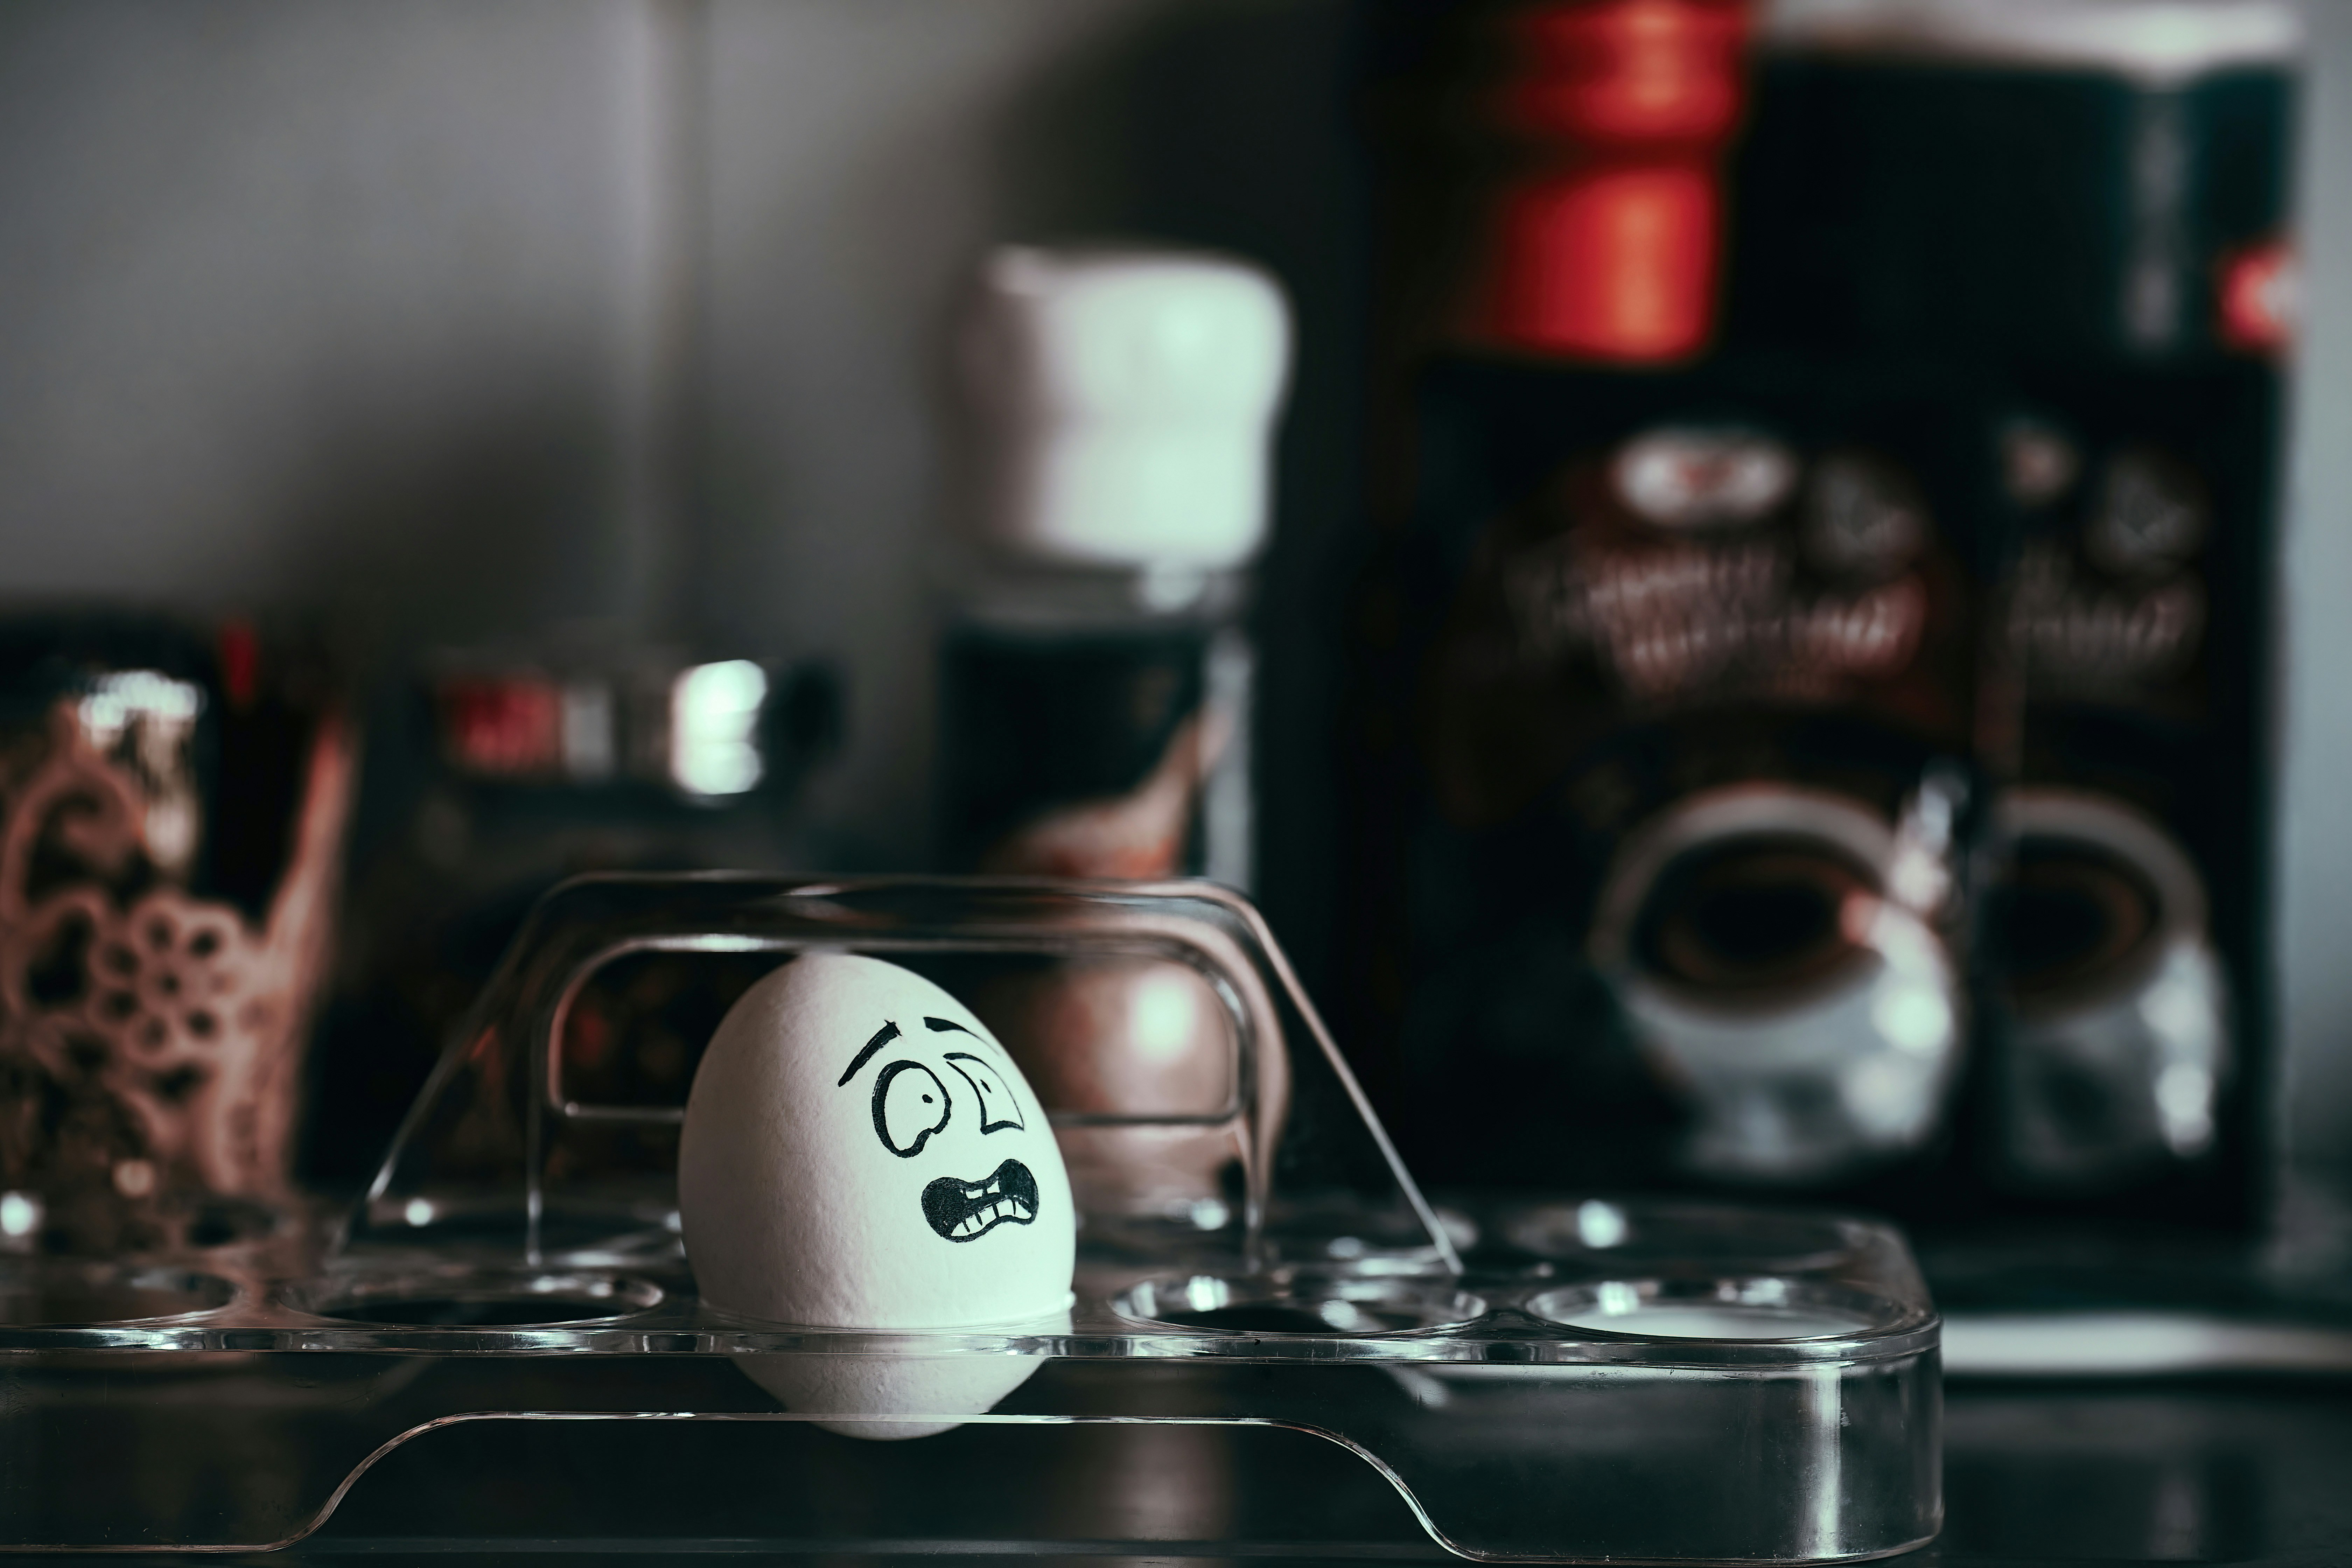 Image ; egg with stressed face drawn